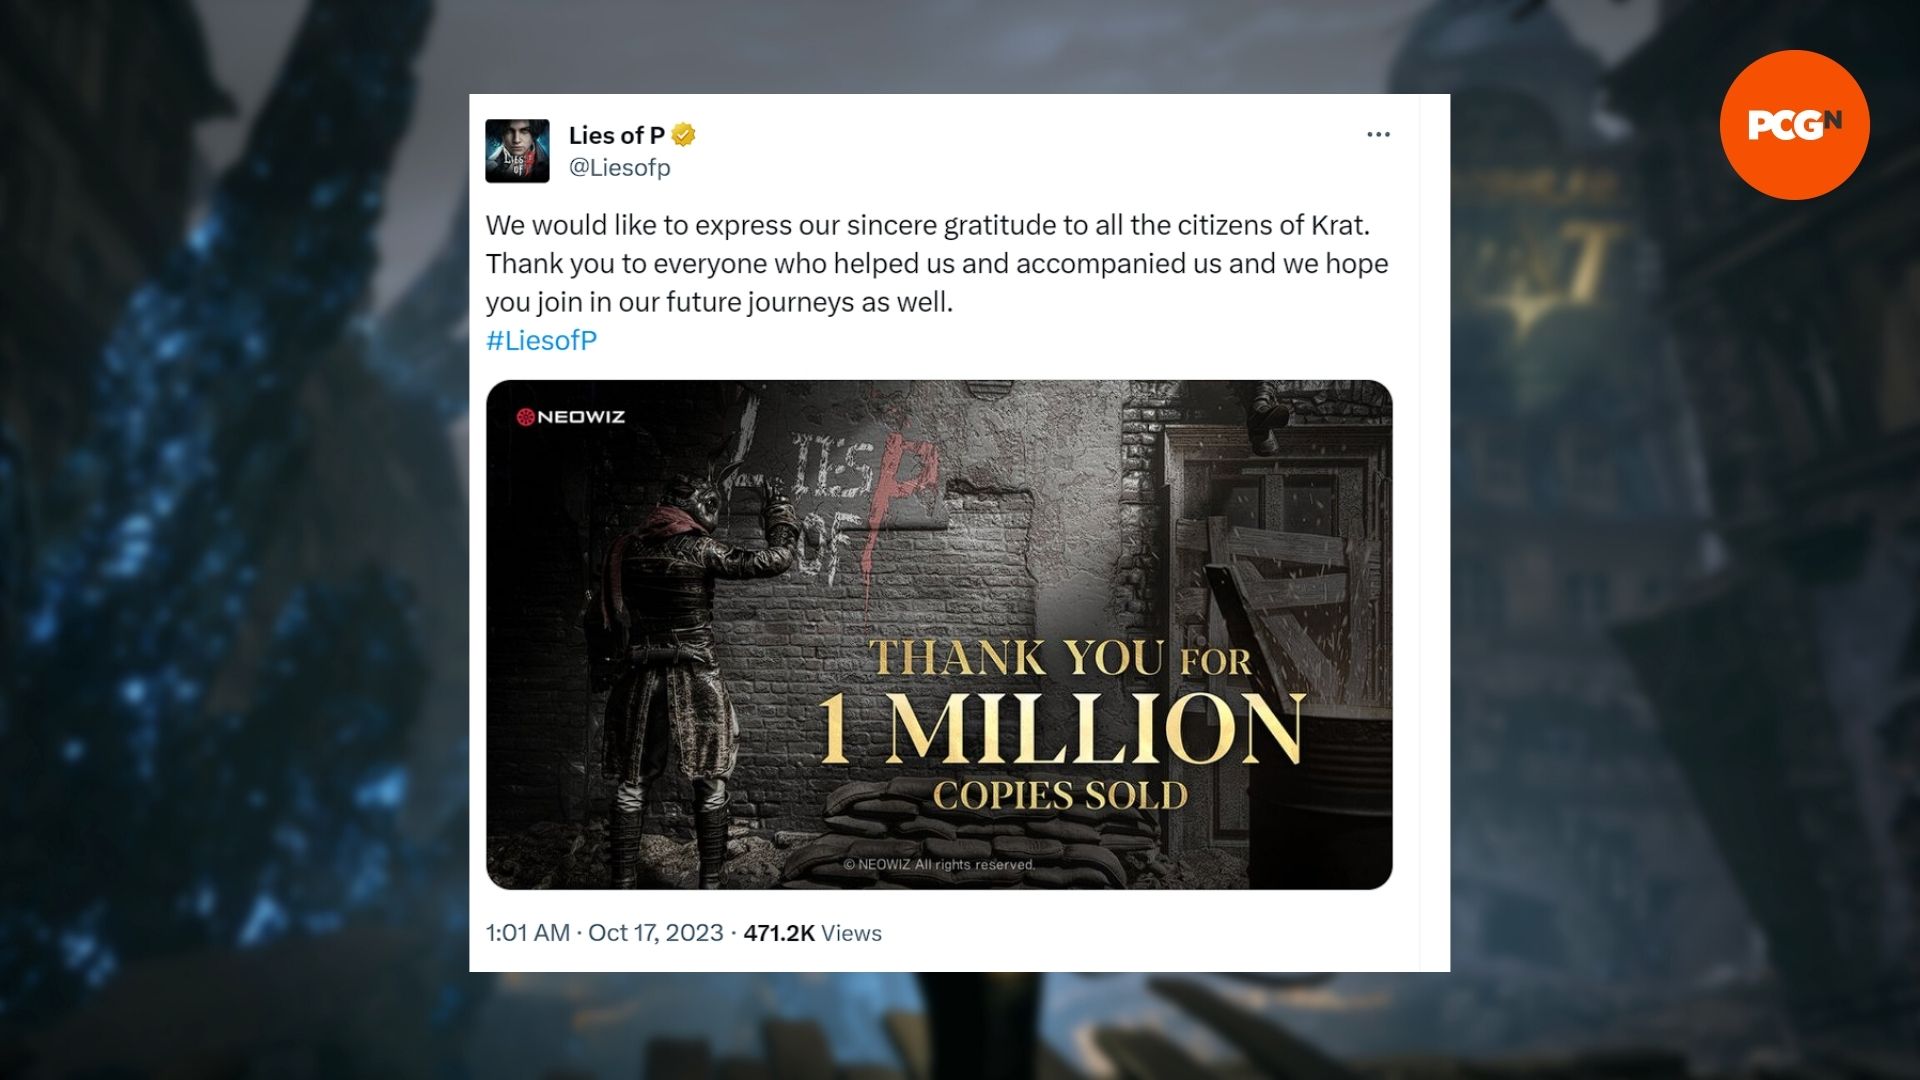 Lies of P smashes one million sales in less than a month